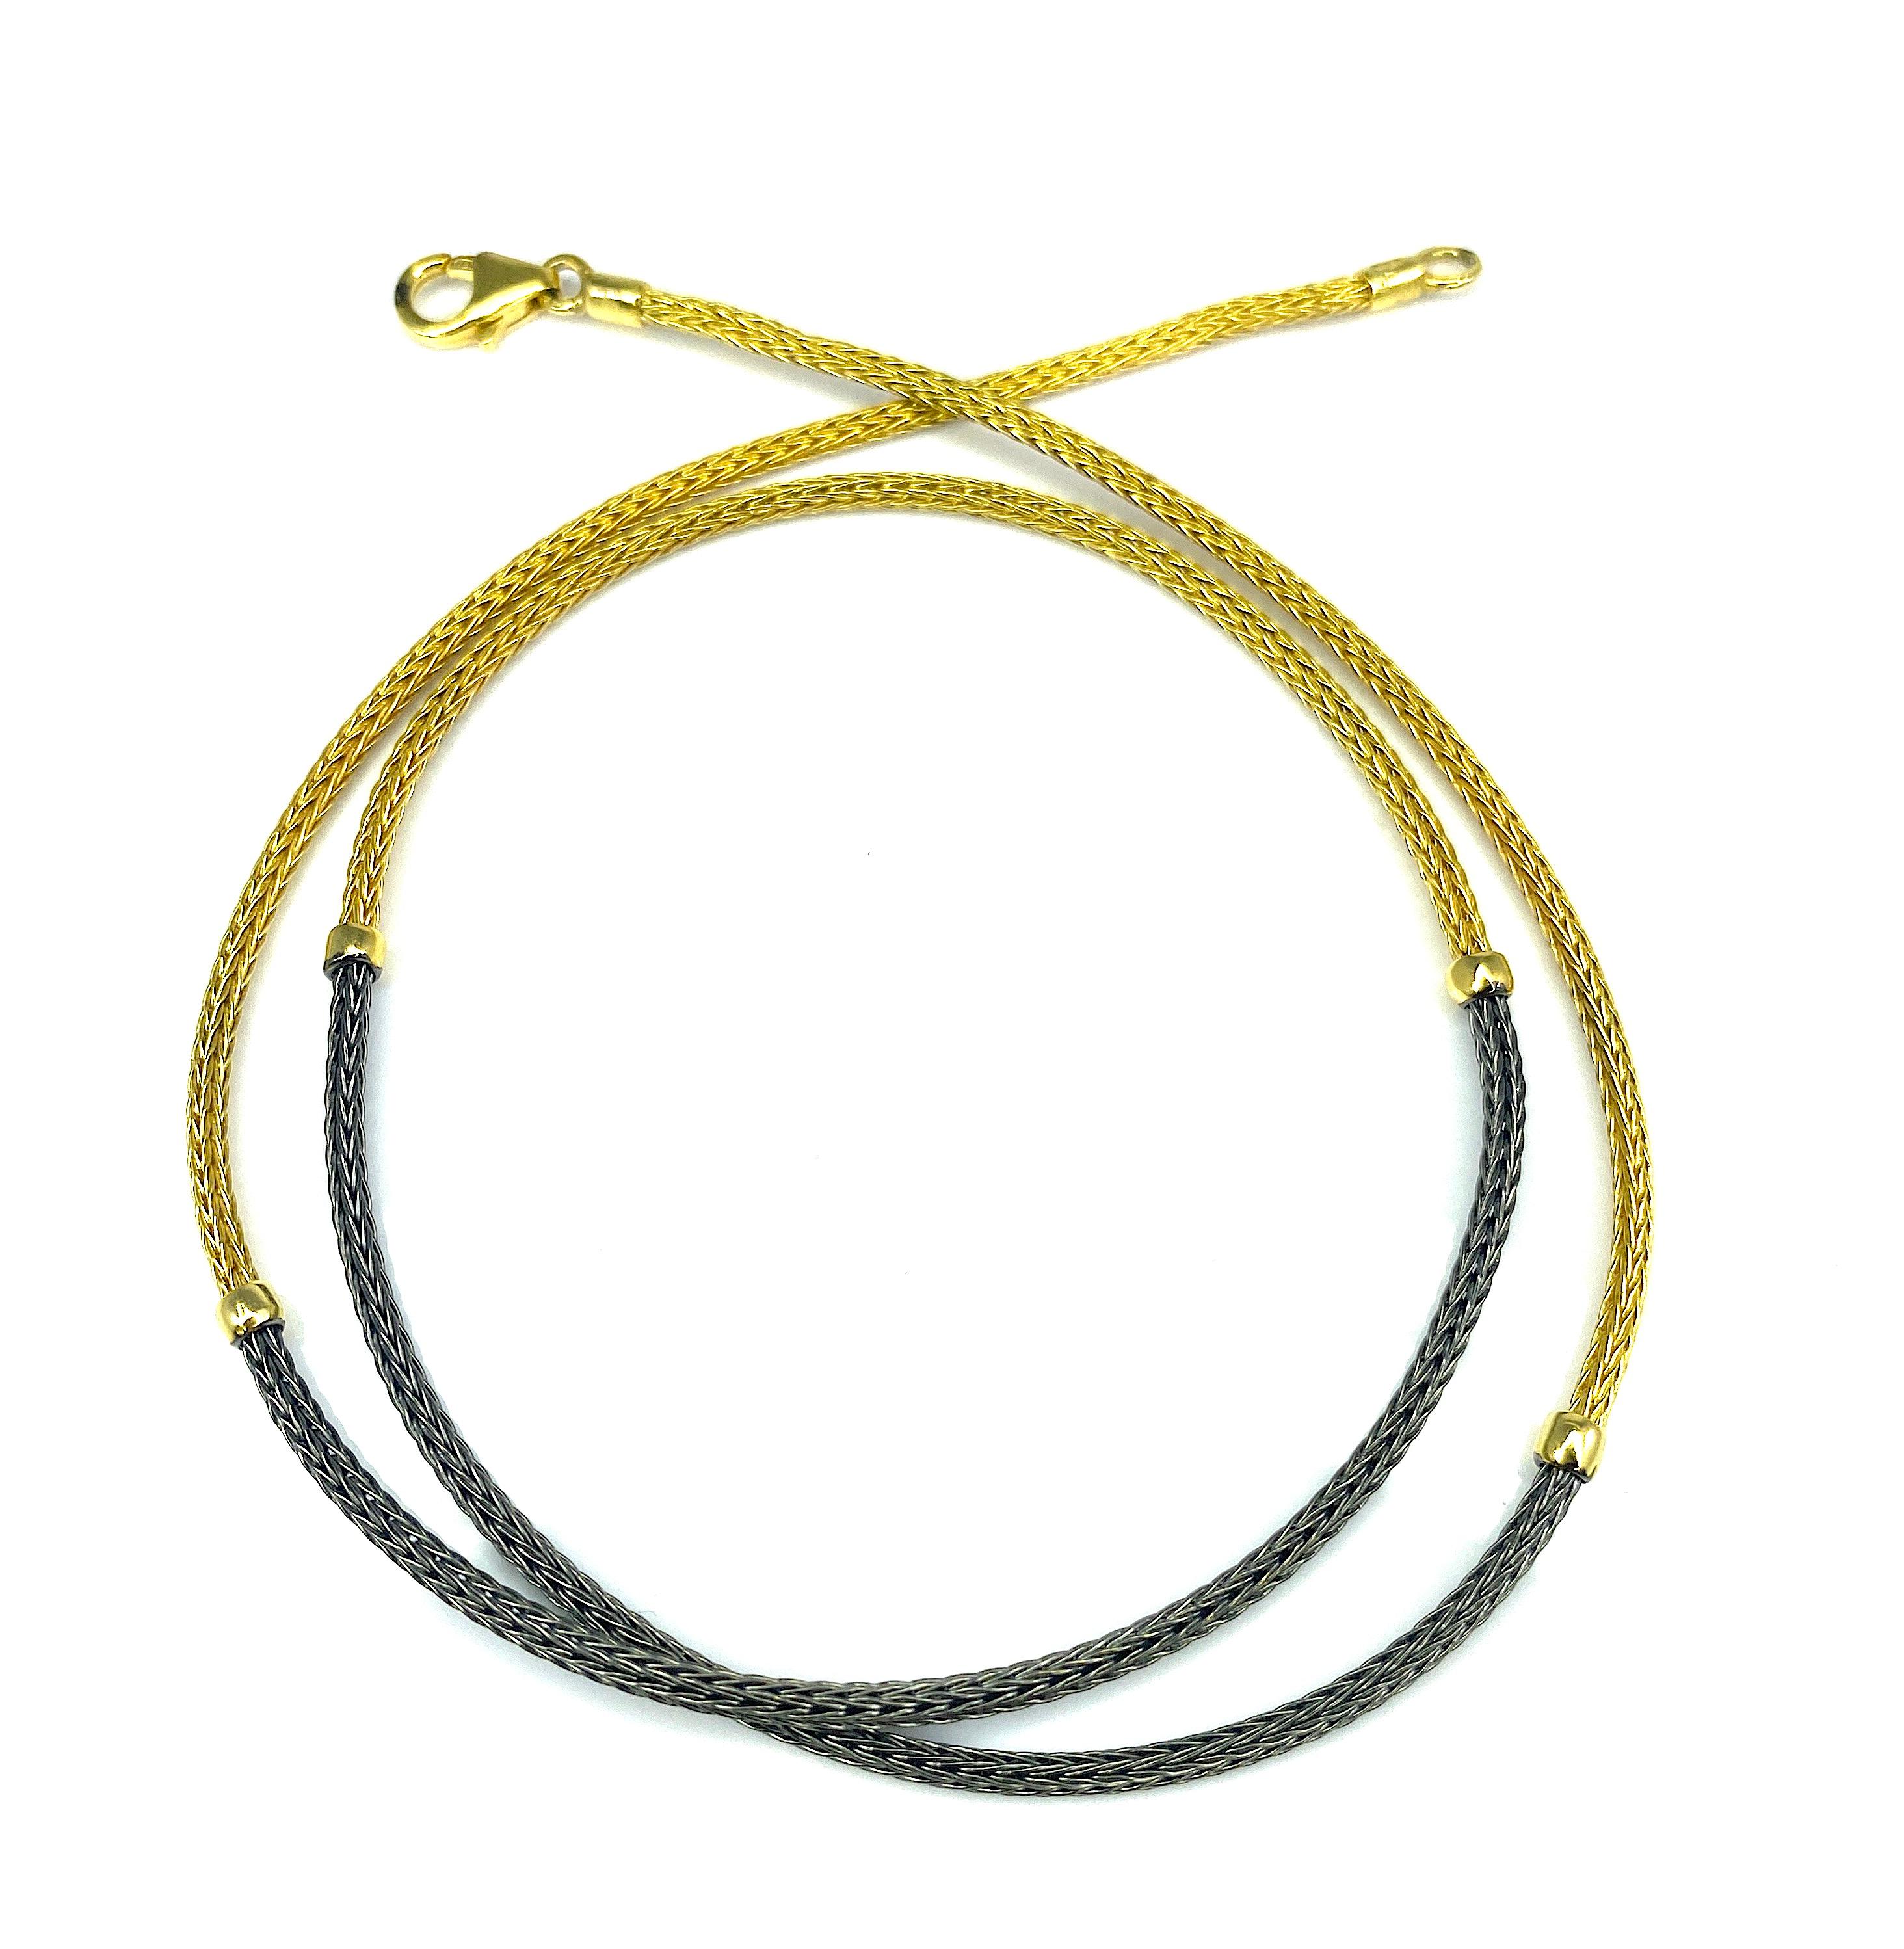 S. Georgios hand-knitted Rope Necklace is made from solid 18 Karat Yellow Gold Threads and Black Rhodium and decorative beads. This rope necklace is very different and you can wear it with all your slides or pendants. It can be also worn plain as a